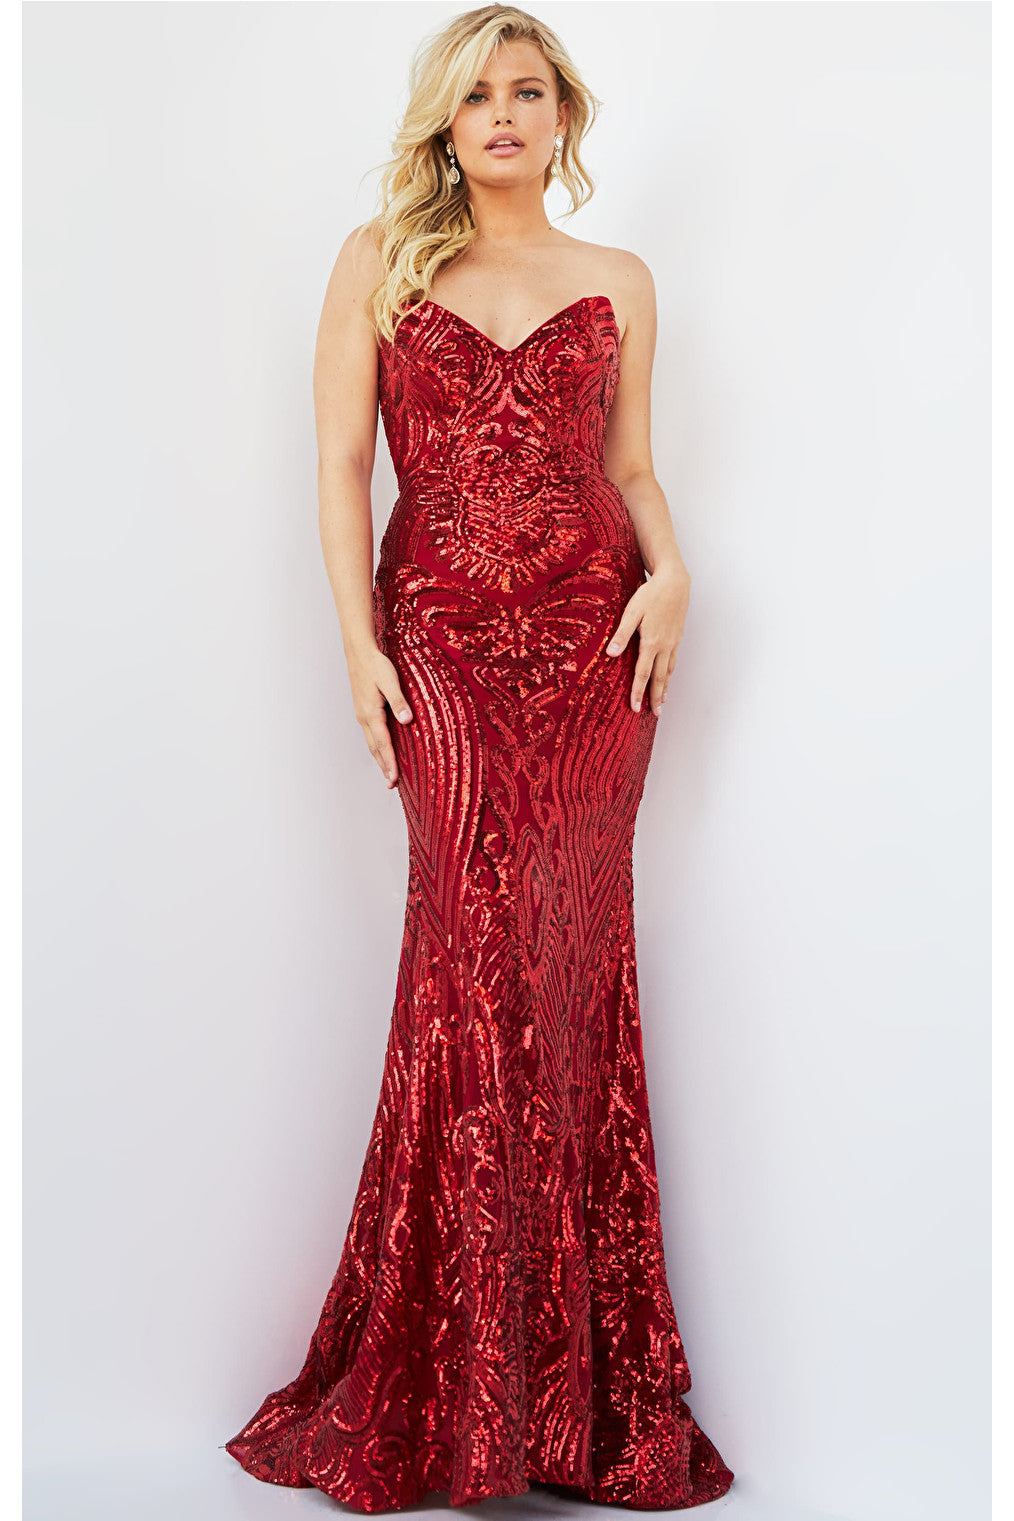 plus size red dress 09695